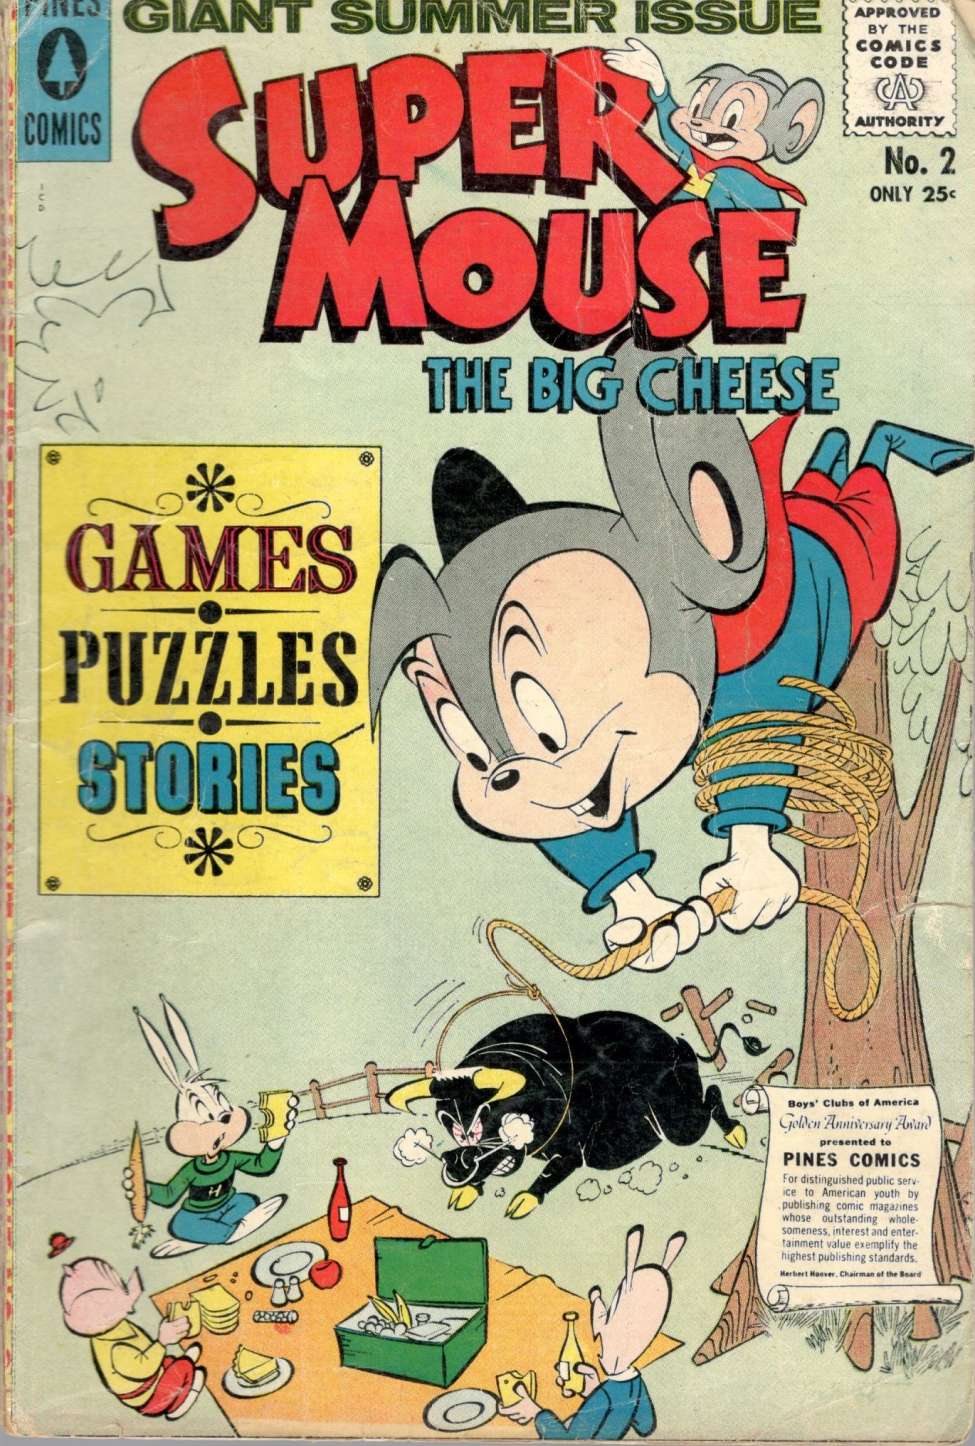 Book Cover For Supermouse, the Big Cheese, Giant Summer Issue